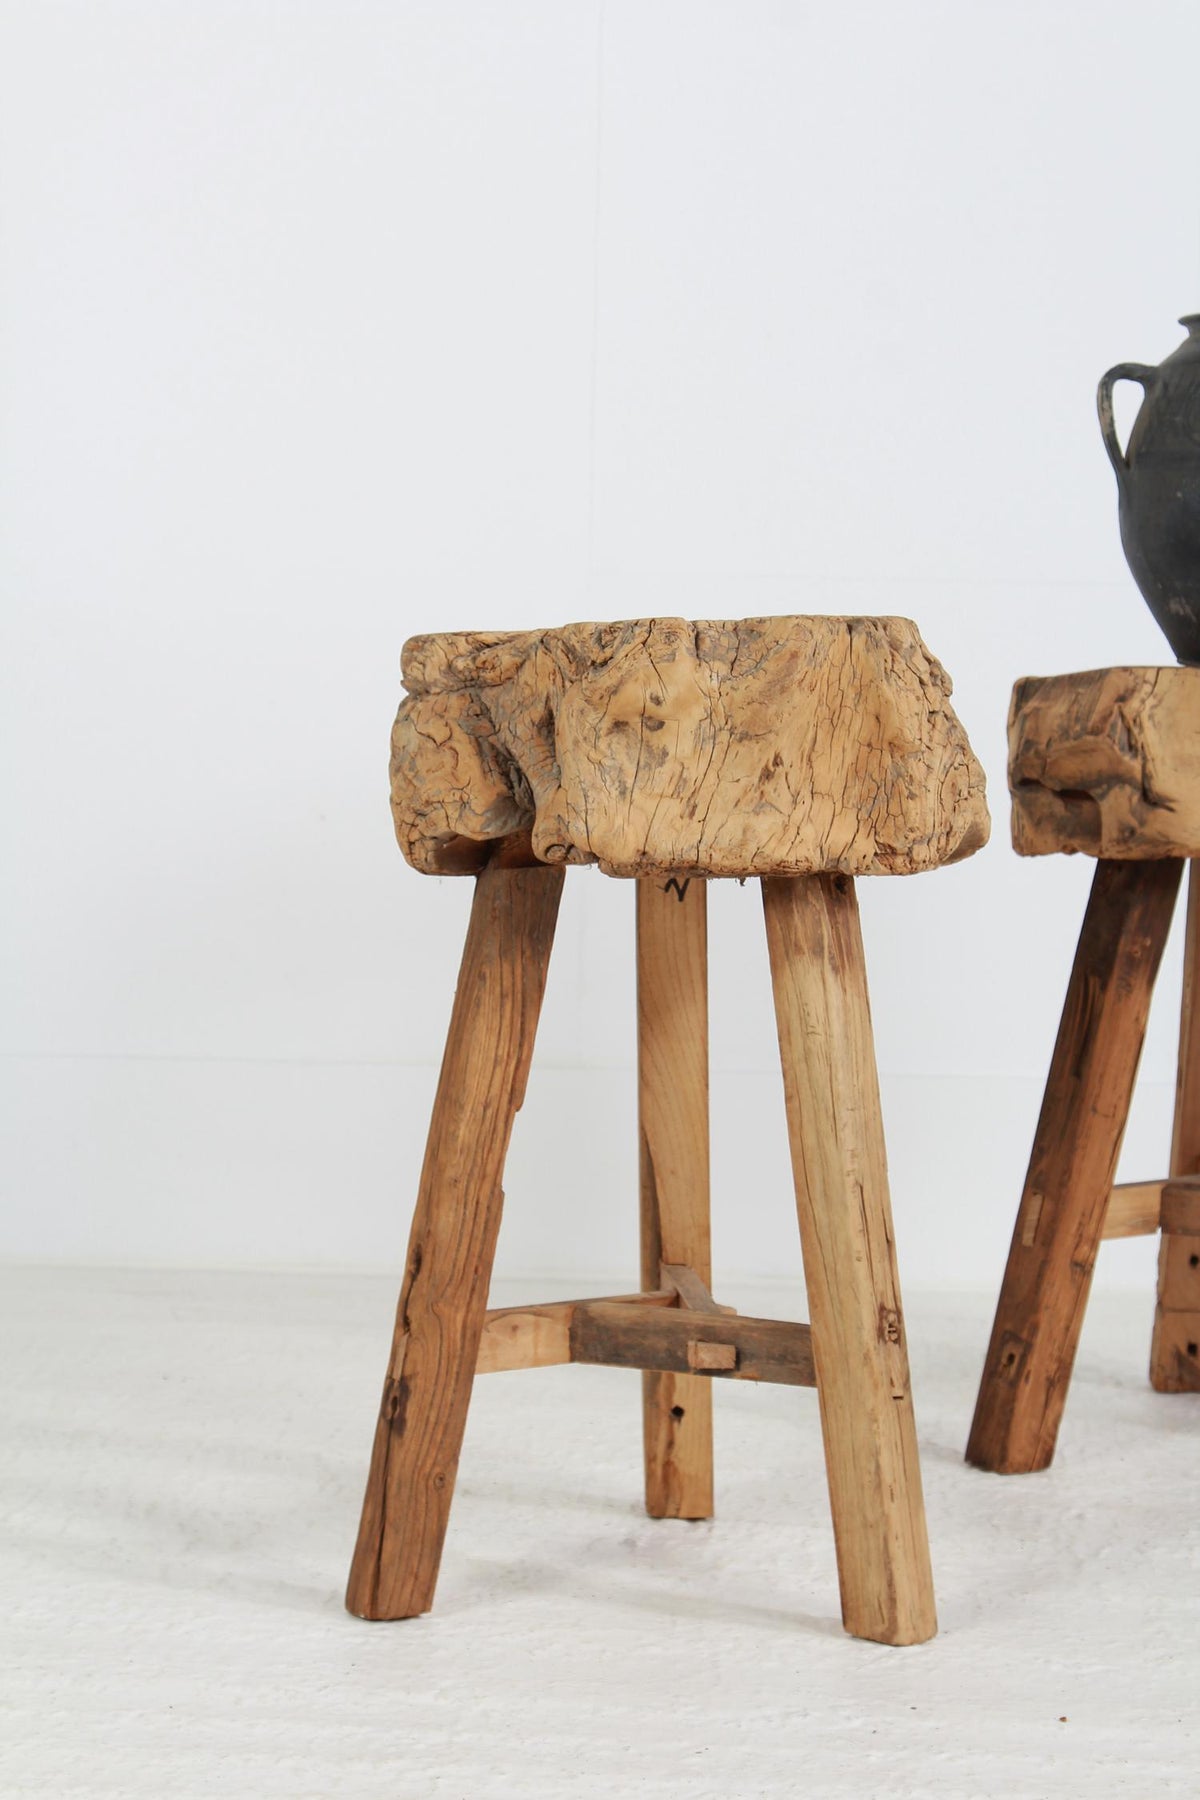 Two Rustic Chinese Gnarly Butchers Block Tables